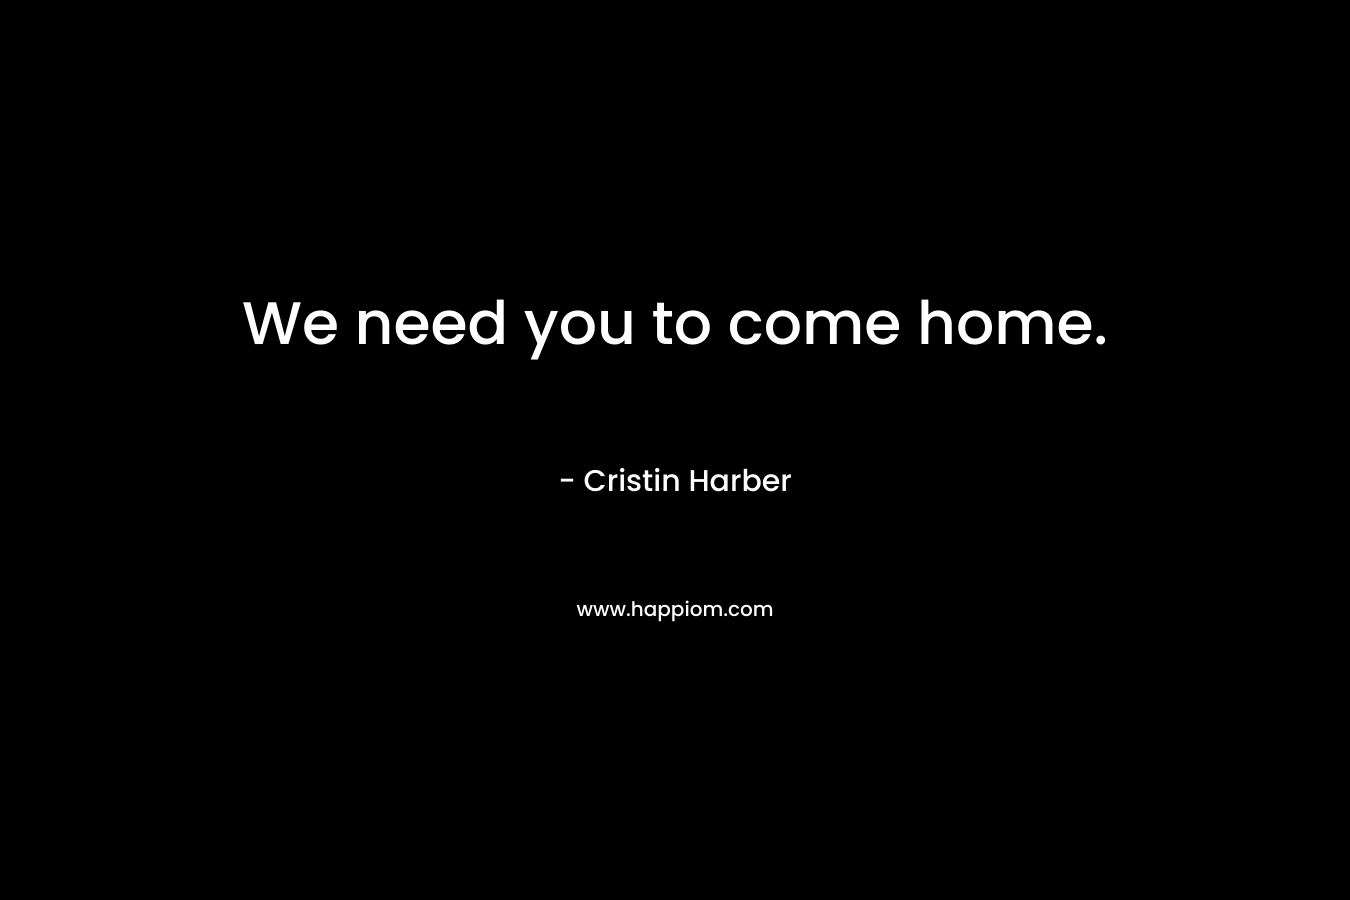 We need you to come home.